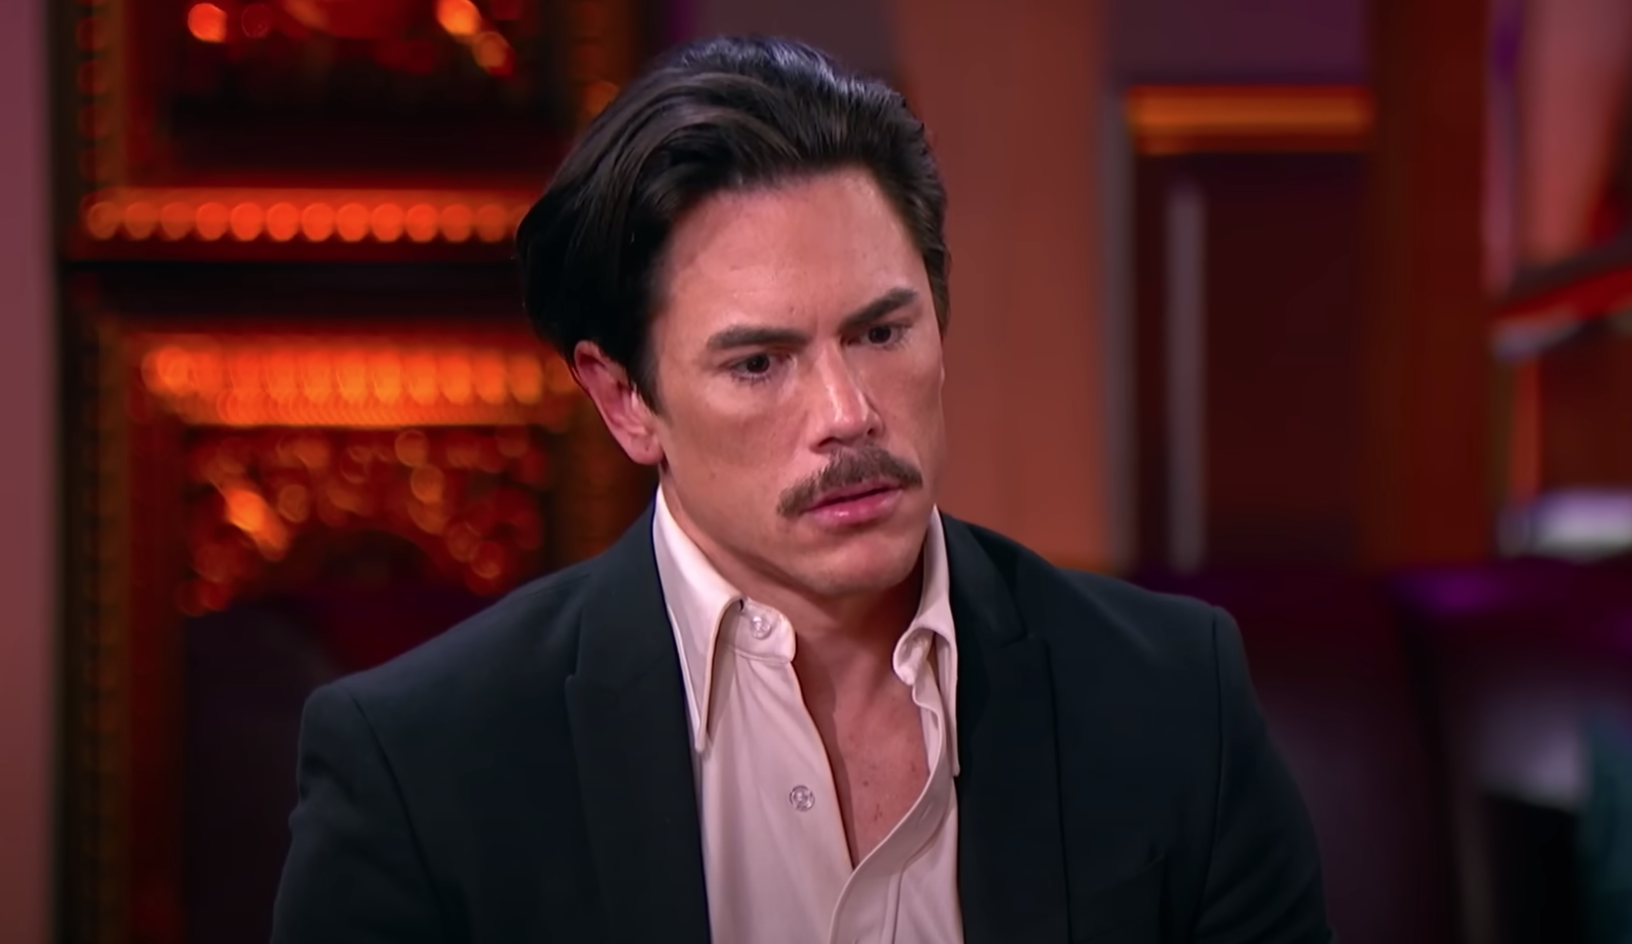 Tom Sandoval, from ‘Vanderpump Rules’, sacrificed his humanity for fame.